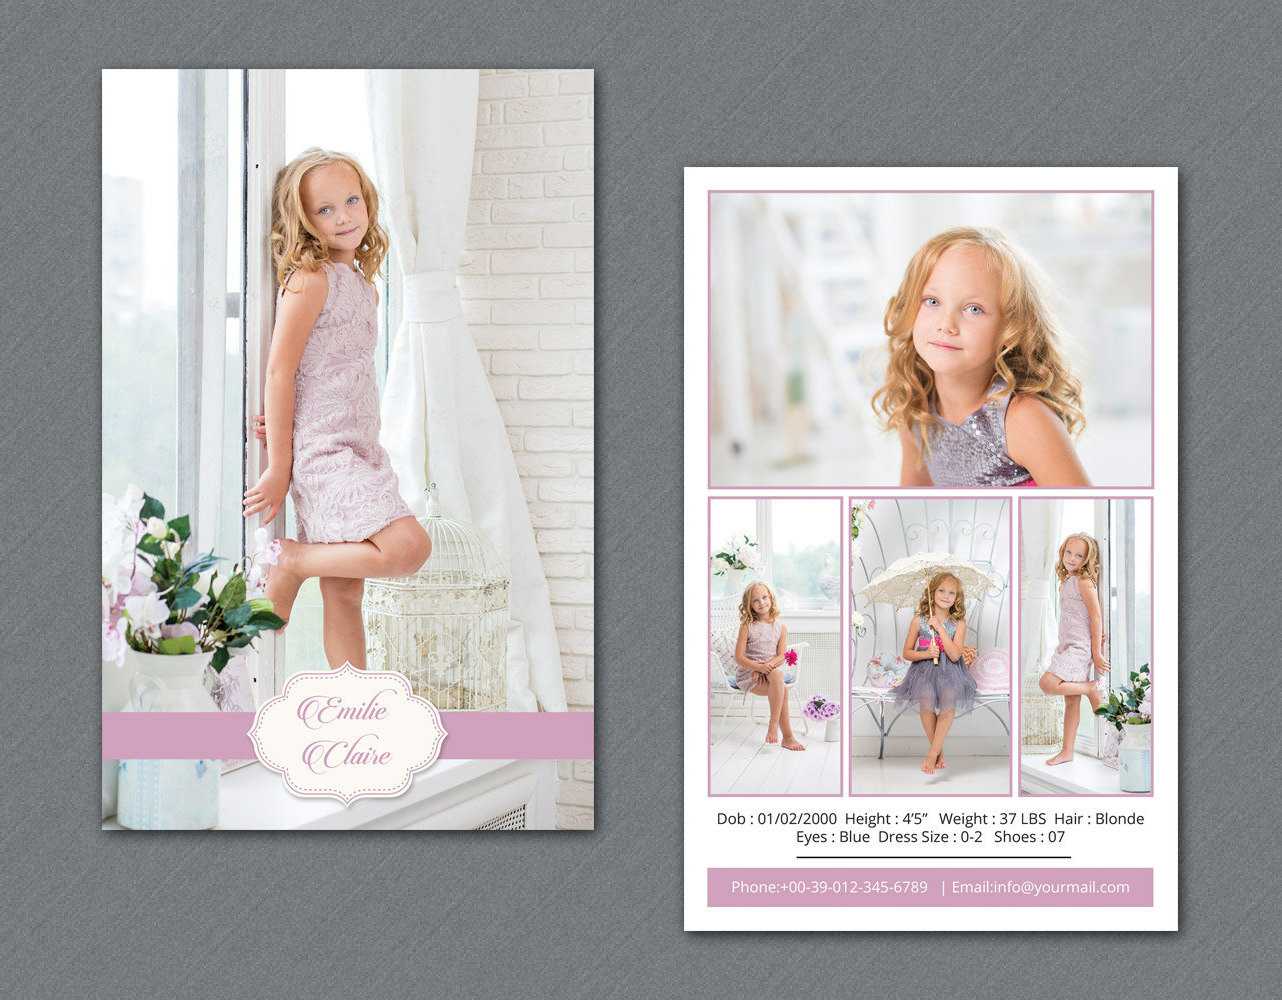 Comp Card Templates ] – On Sale Model Comp Card Photoshop Intended For Comp Card Template Download